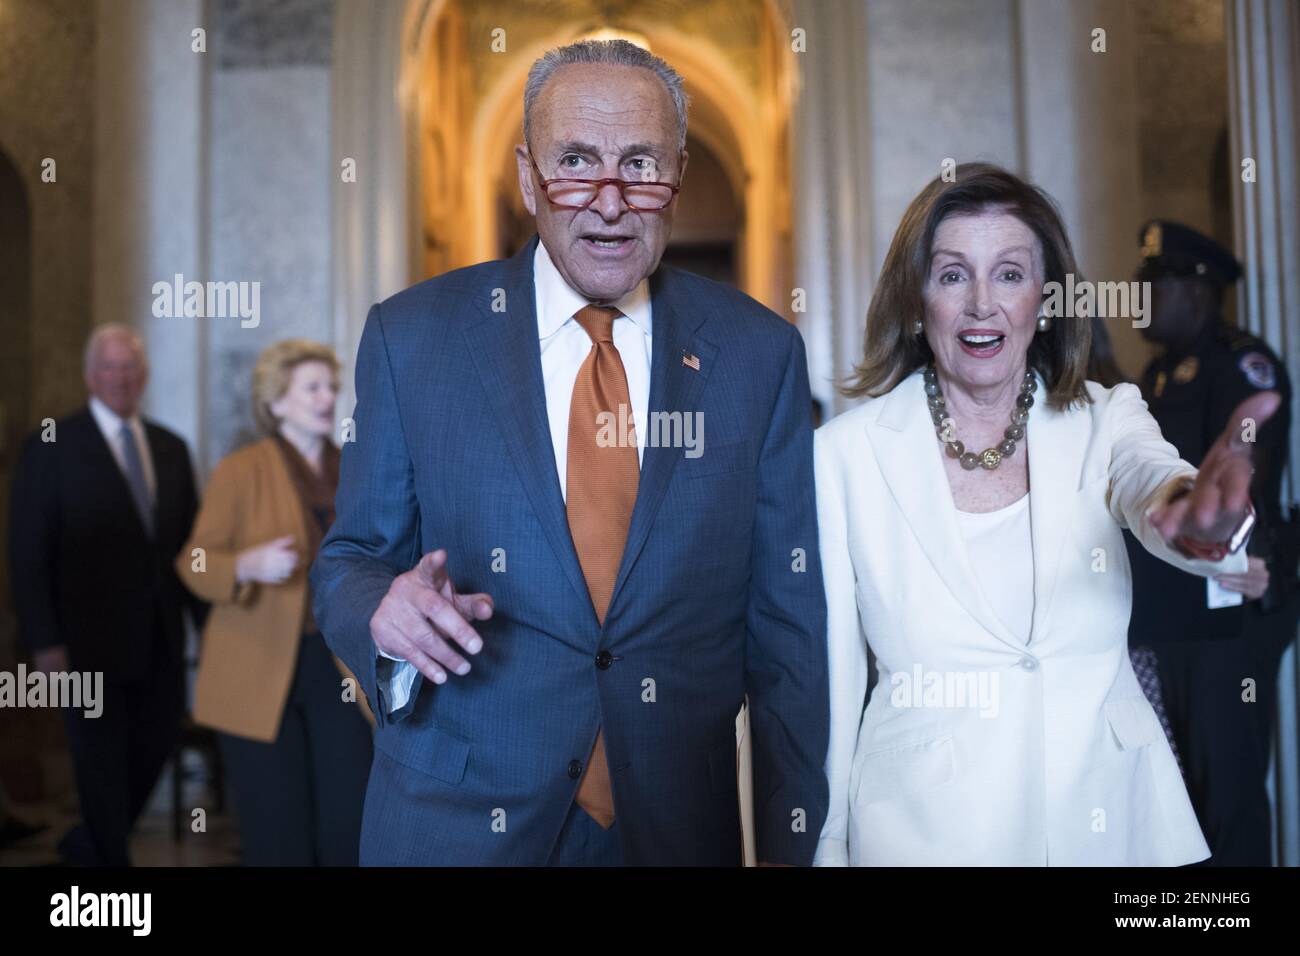 UNITED STATES - SEPTEMBER 09: Speaker of the House Nancy Pelosi, D-Calif., and Senate Minority Leader Chuck Schumer, D-N.Y., make their way to a news conference in the Capitol to call on the Senate to vote on the Bipartisan Background Checks Act on Monday, September 9, 2019. (Photo By Tom Williams/CQ Roll Call/Sipa USA) Stock Photo